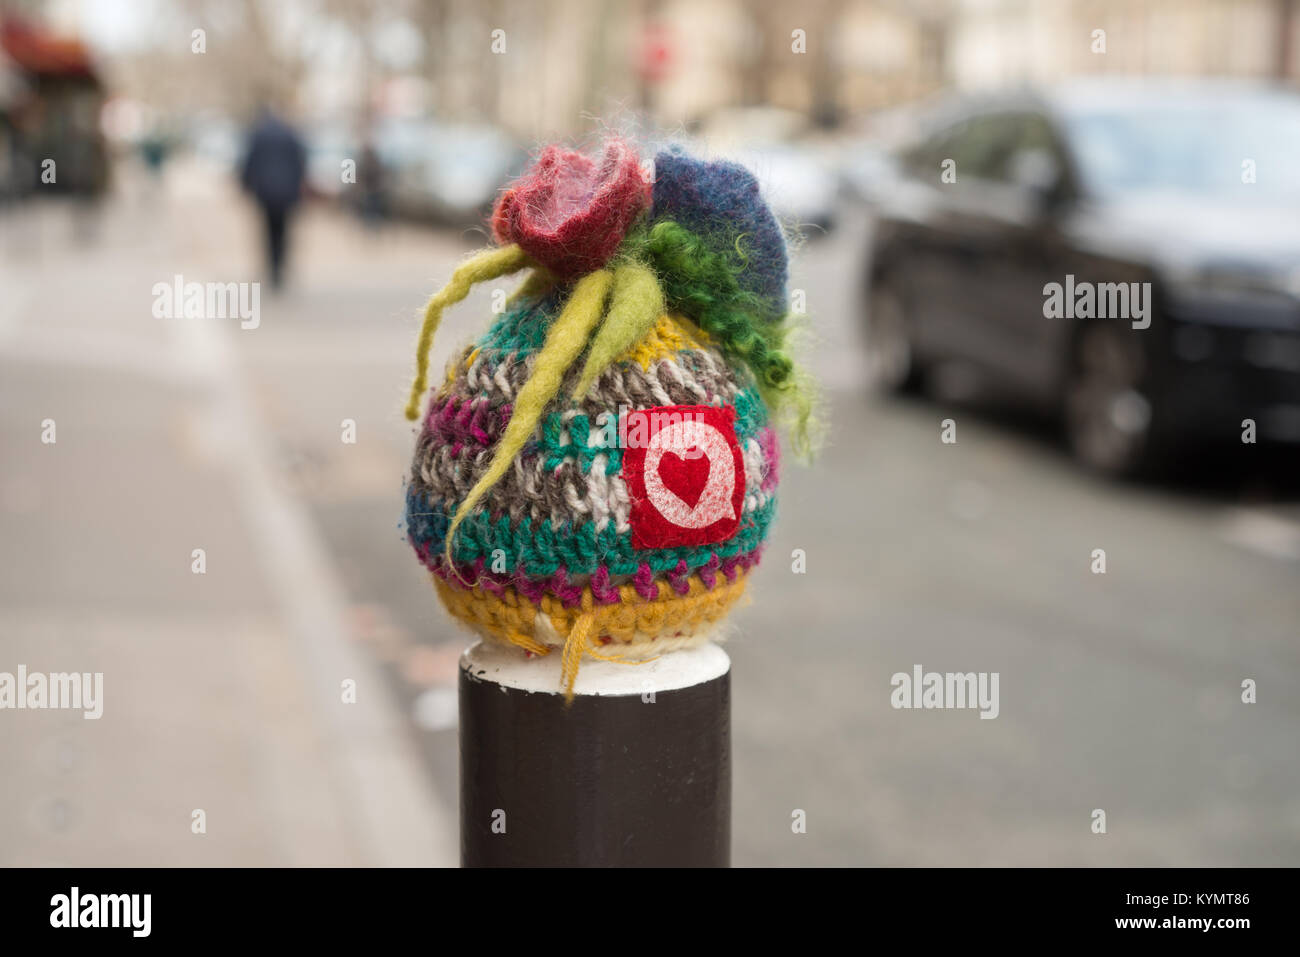 Knitted top of a bollard in Paris, France Stock Photo